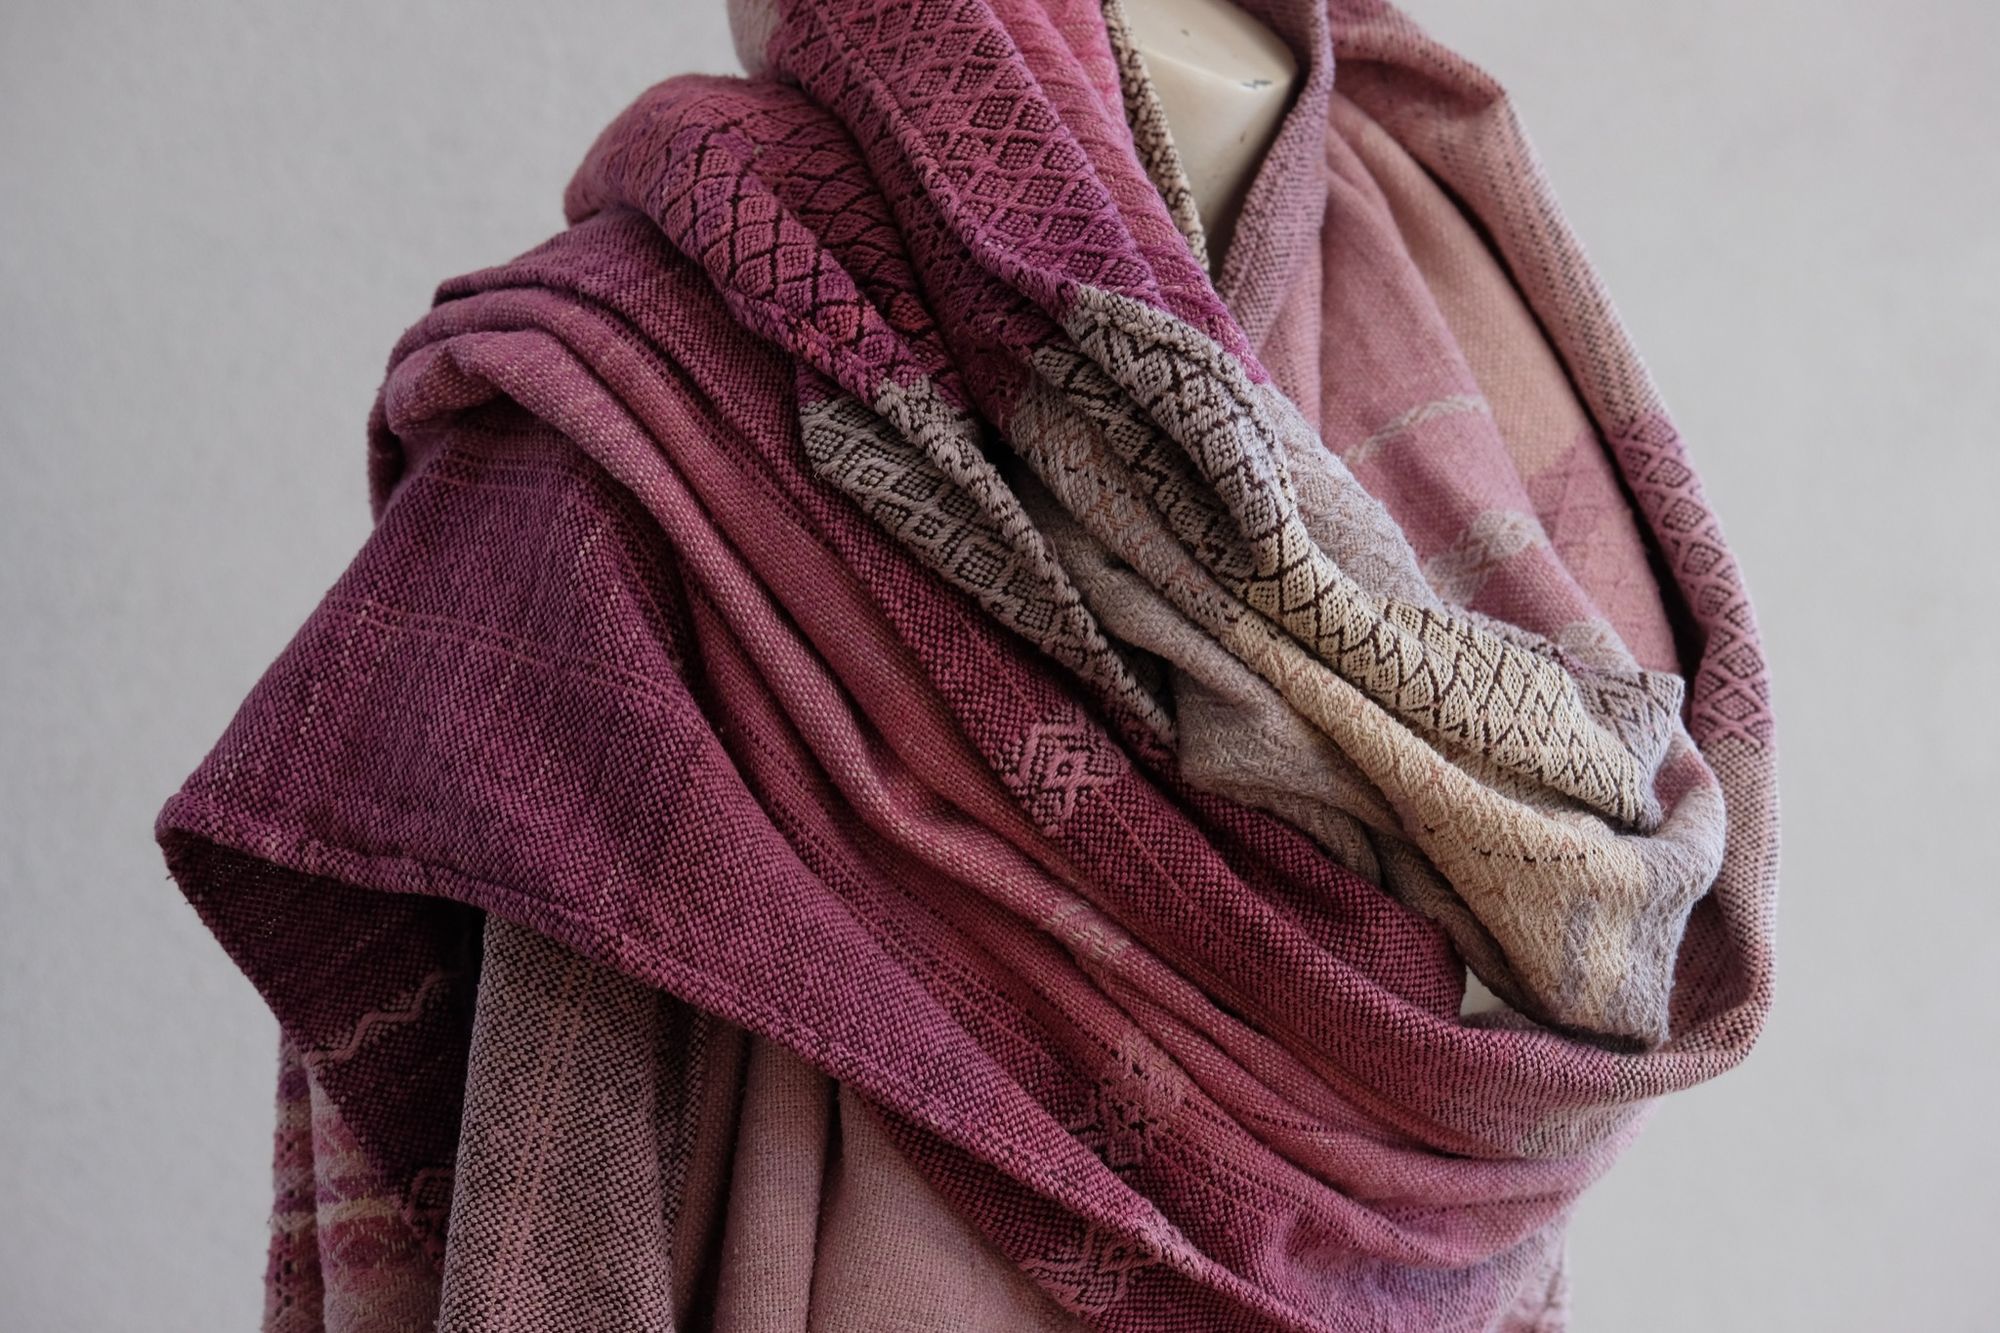 Handwoven fabric rests on a mannequin in a gallery. The fabric is naturally dyed with cochineal in all shades of pink and fuchsia